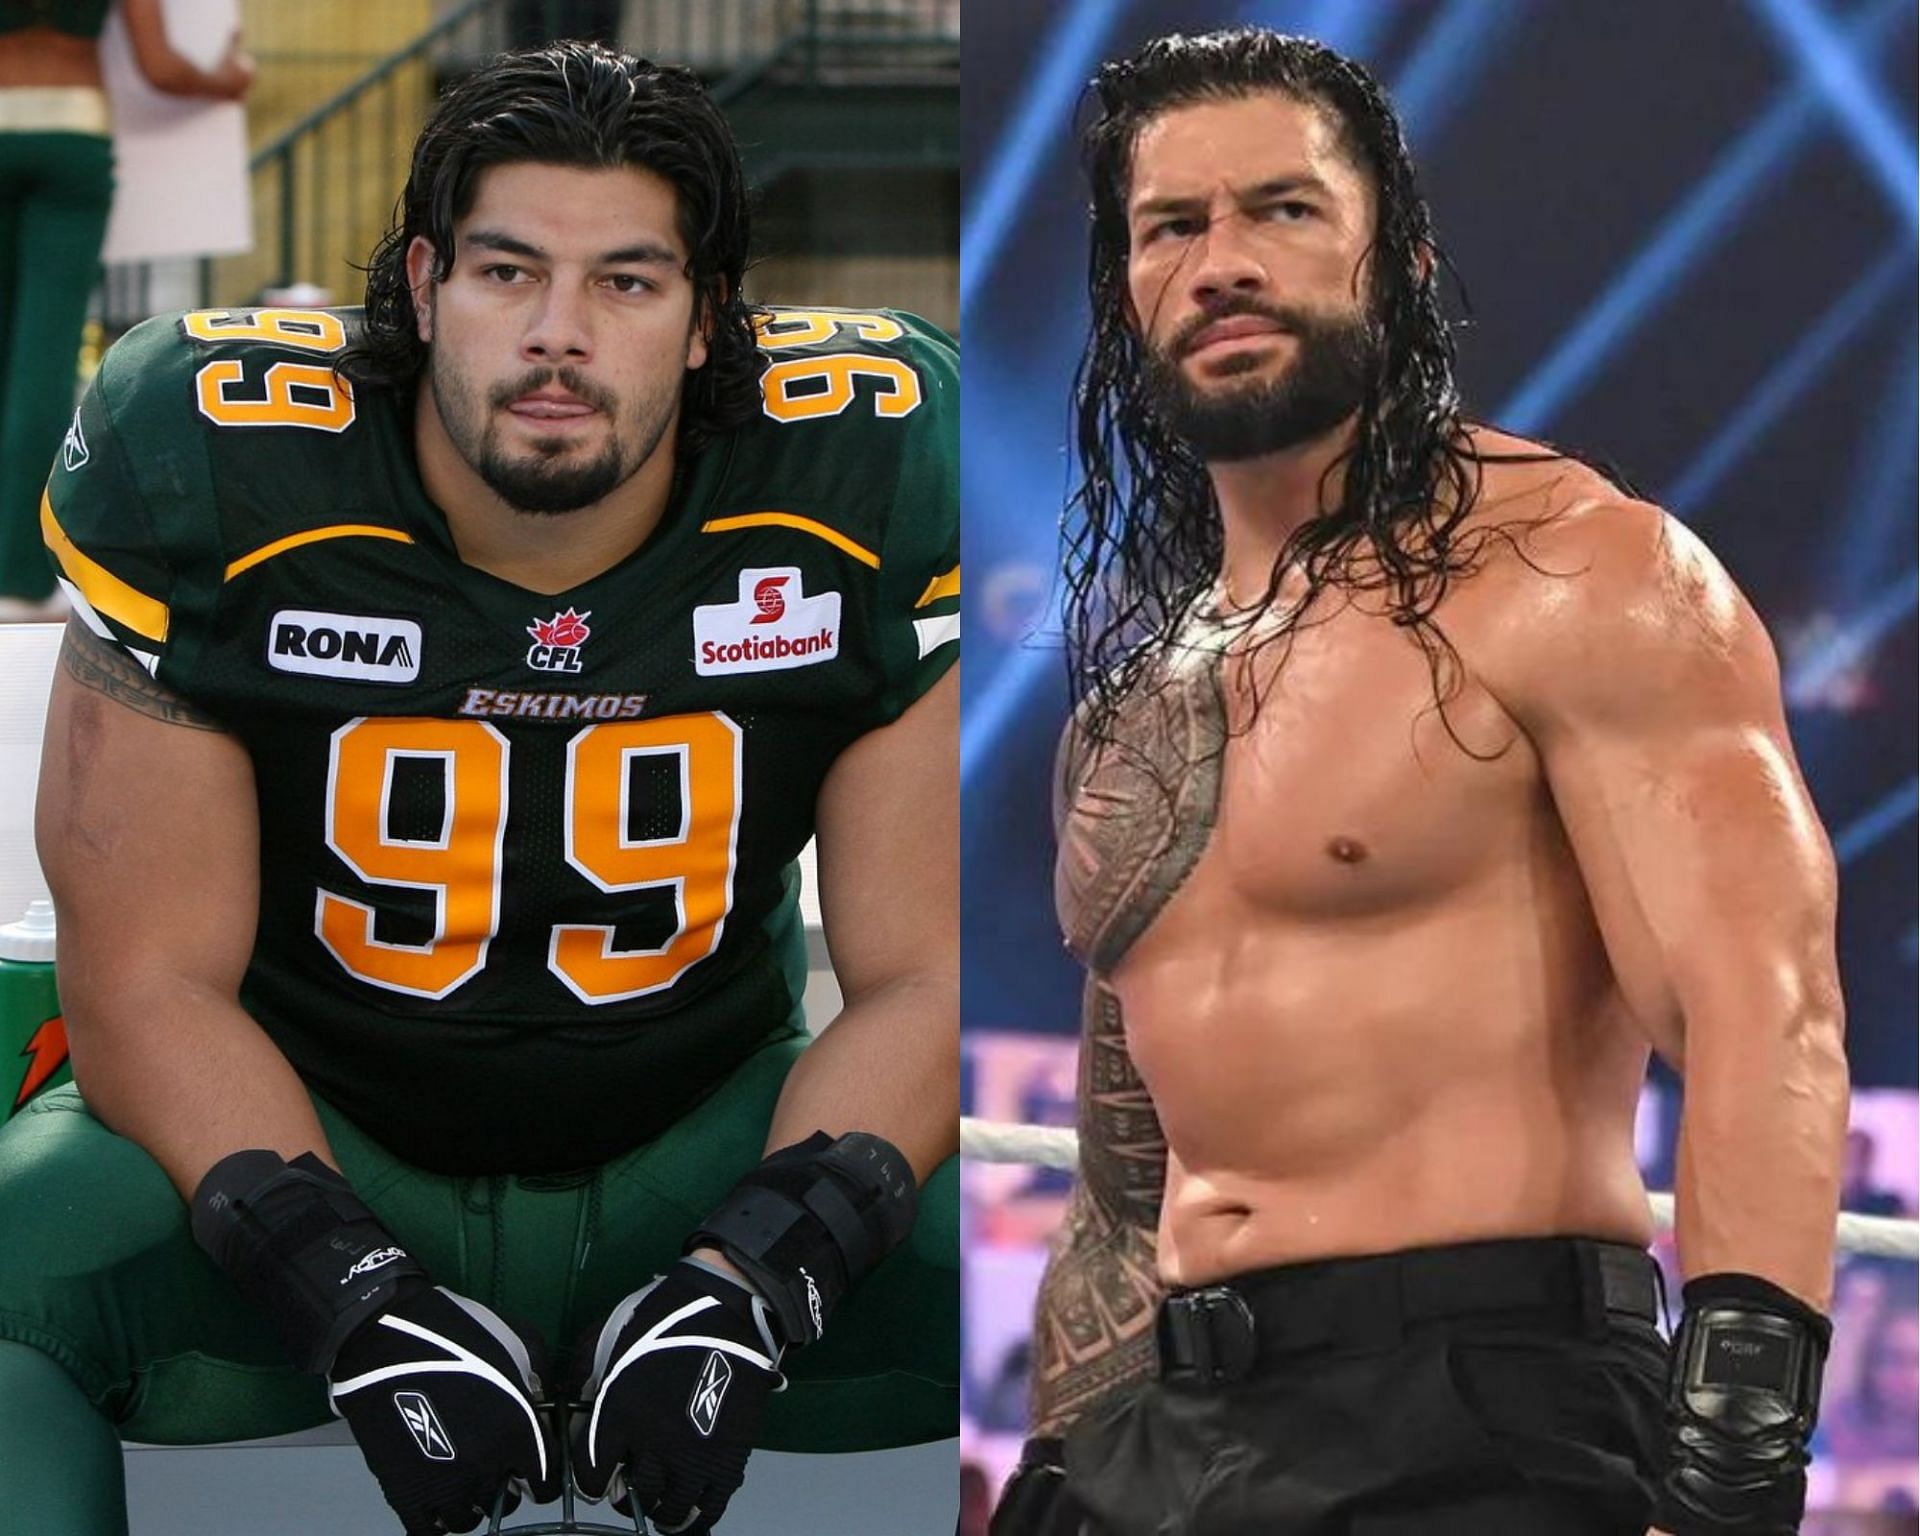 Roman Reigns has come a long way from his football career